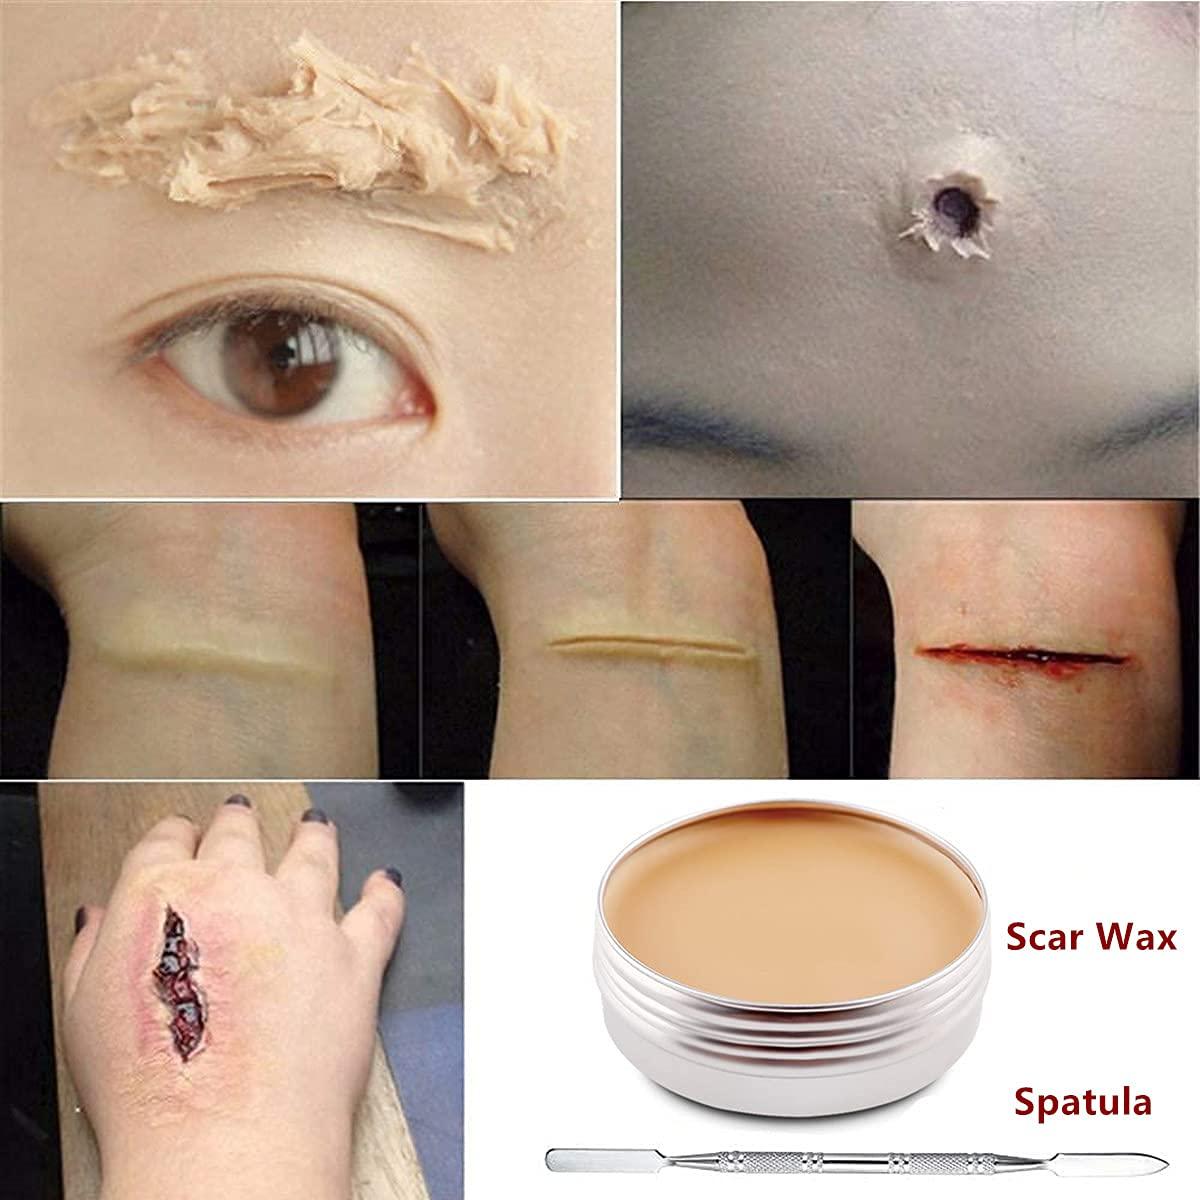 Go Ho Fake Blood Gel and Scar Wax SFX Zombie Make Up Special Effects Fake Molding Wound Skin Wax Halloween Makeup with Caster Sealer&Sponge&Spatula,Make Specail For Halloween Festival & Party